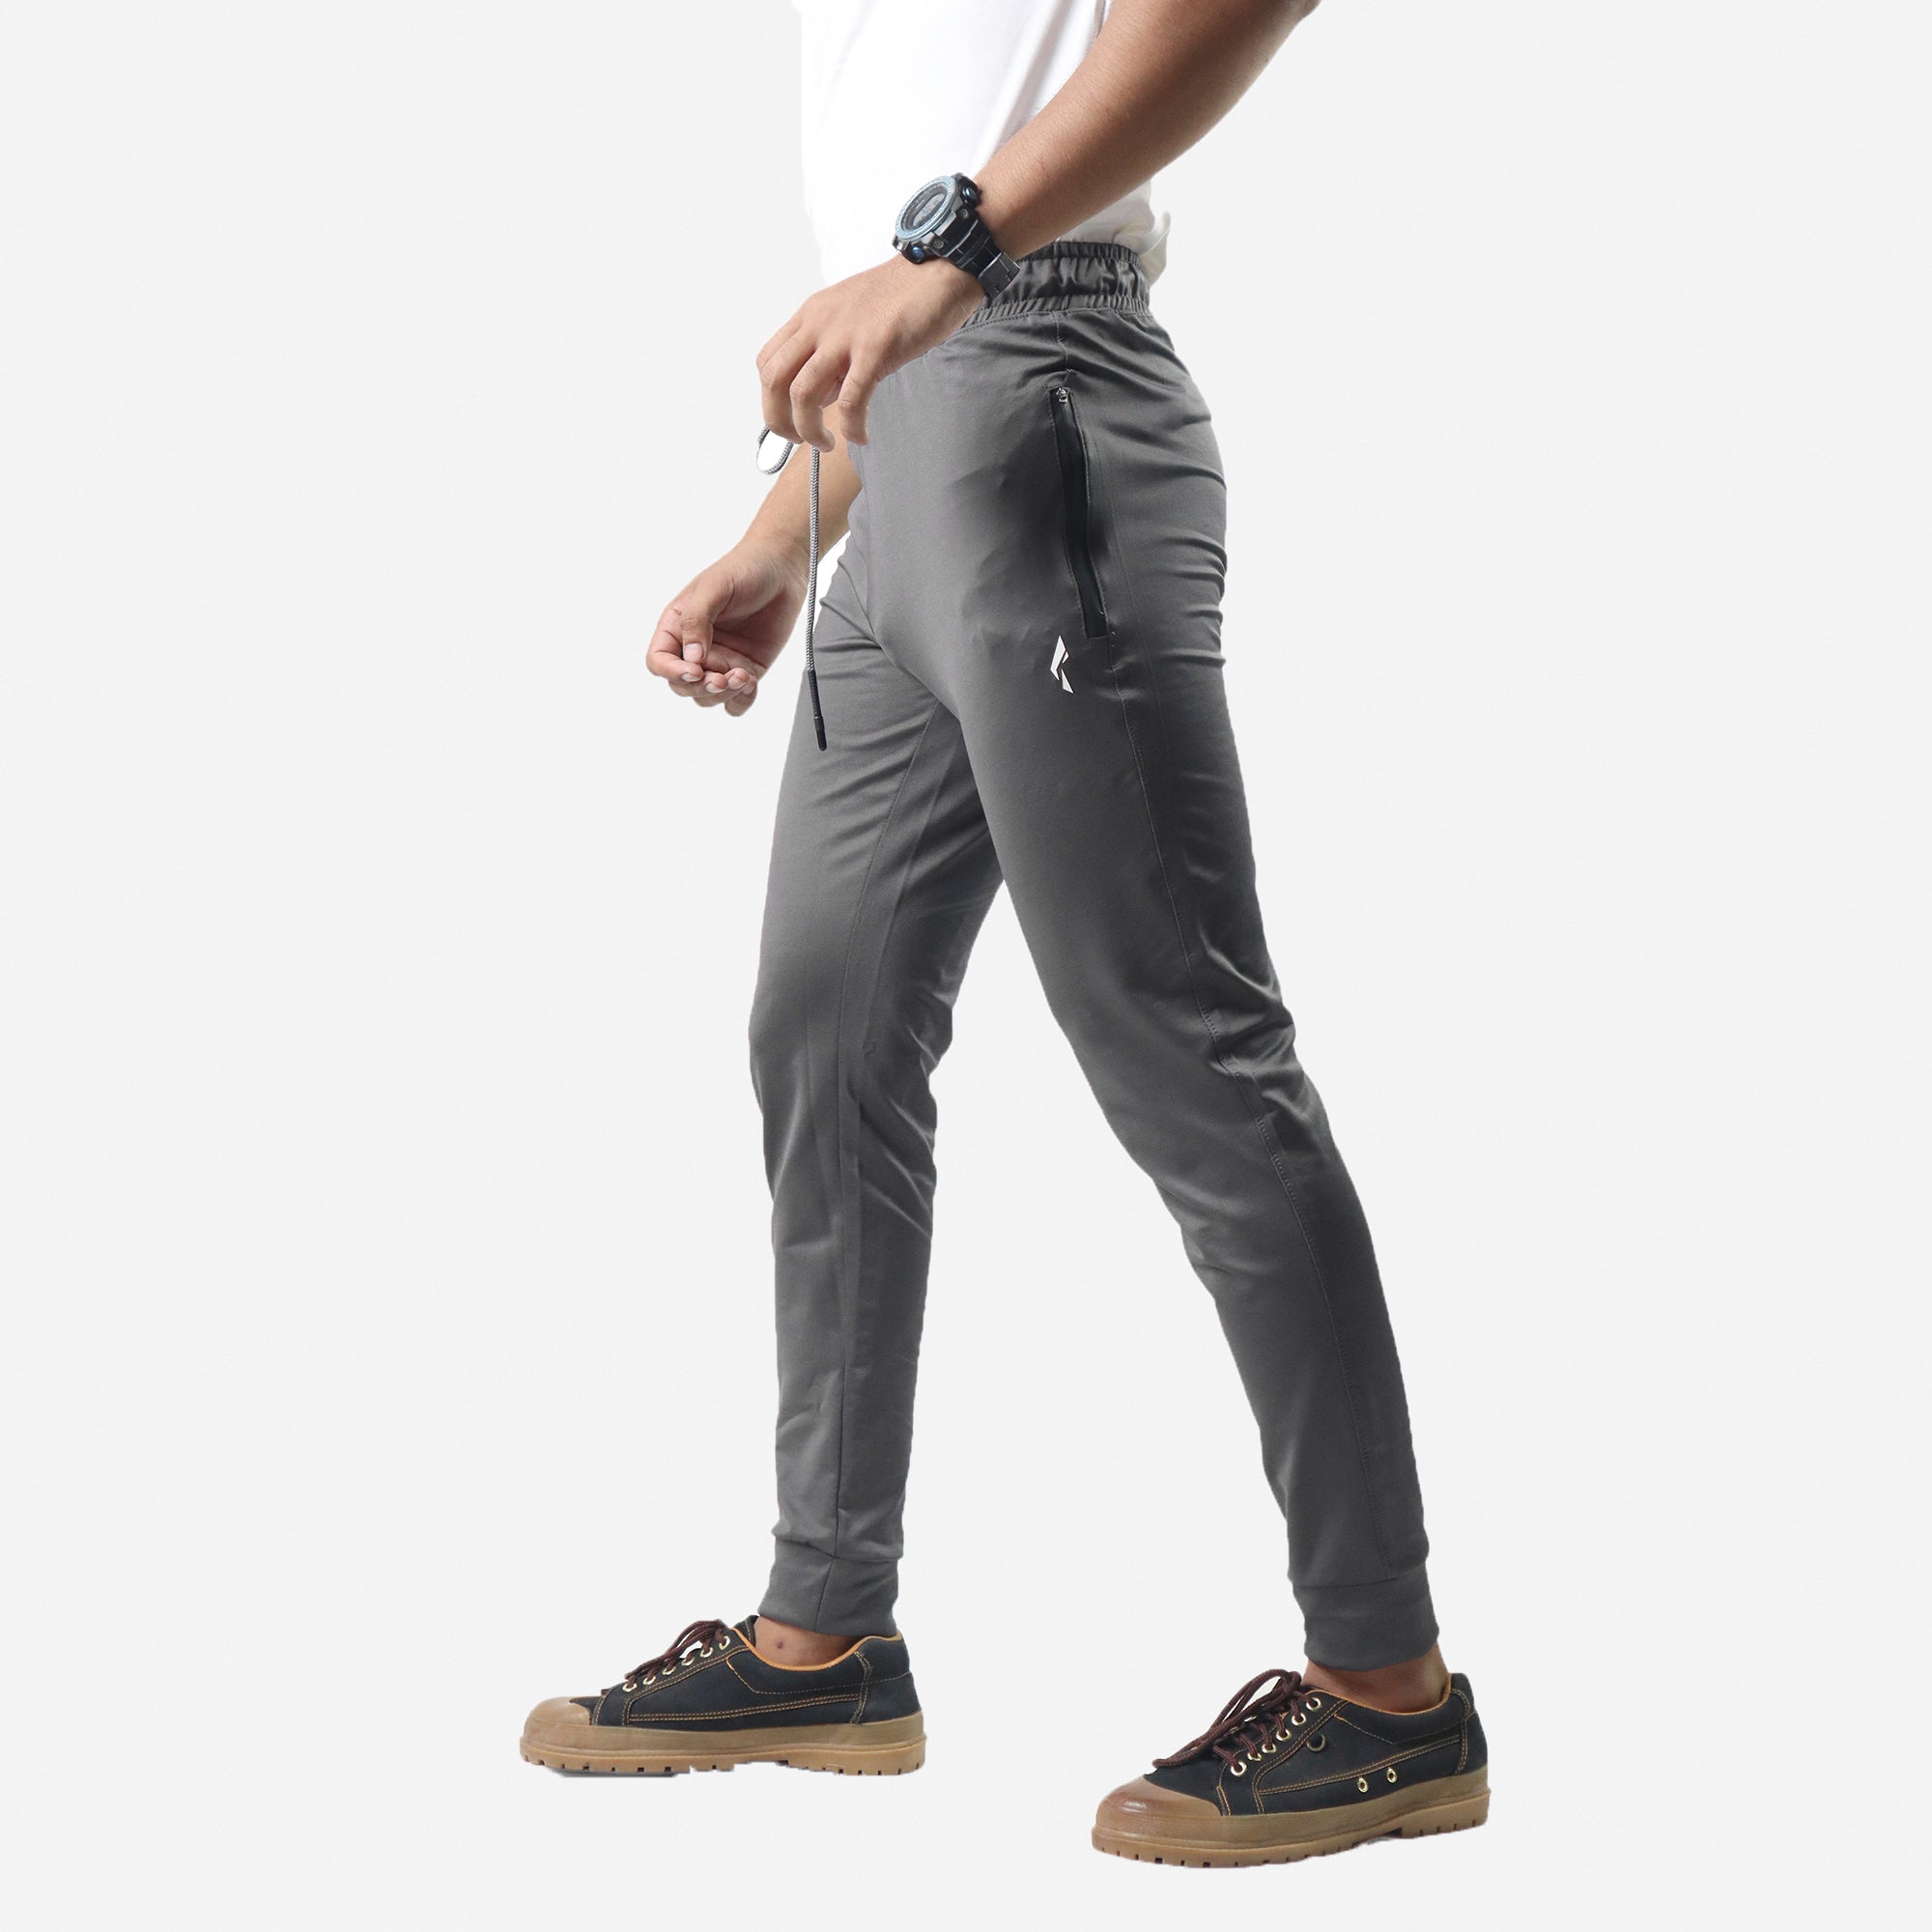 Men's Joggers Workout Athletic Pants for Gym - Metallic Grey